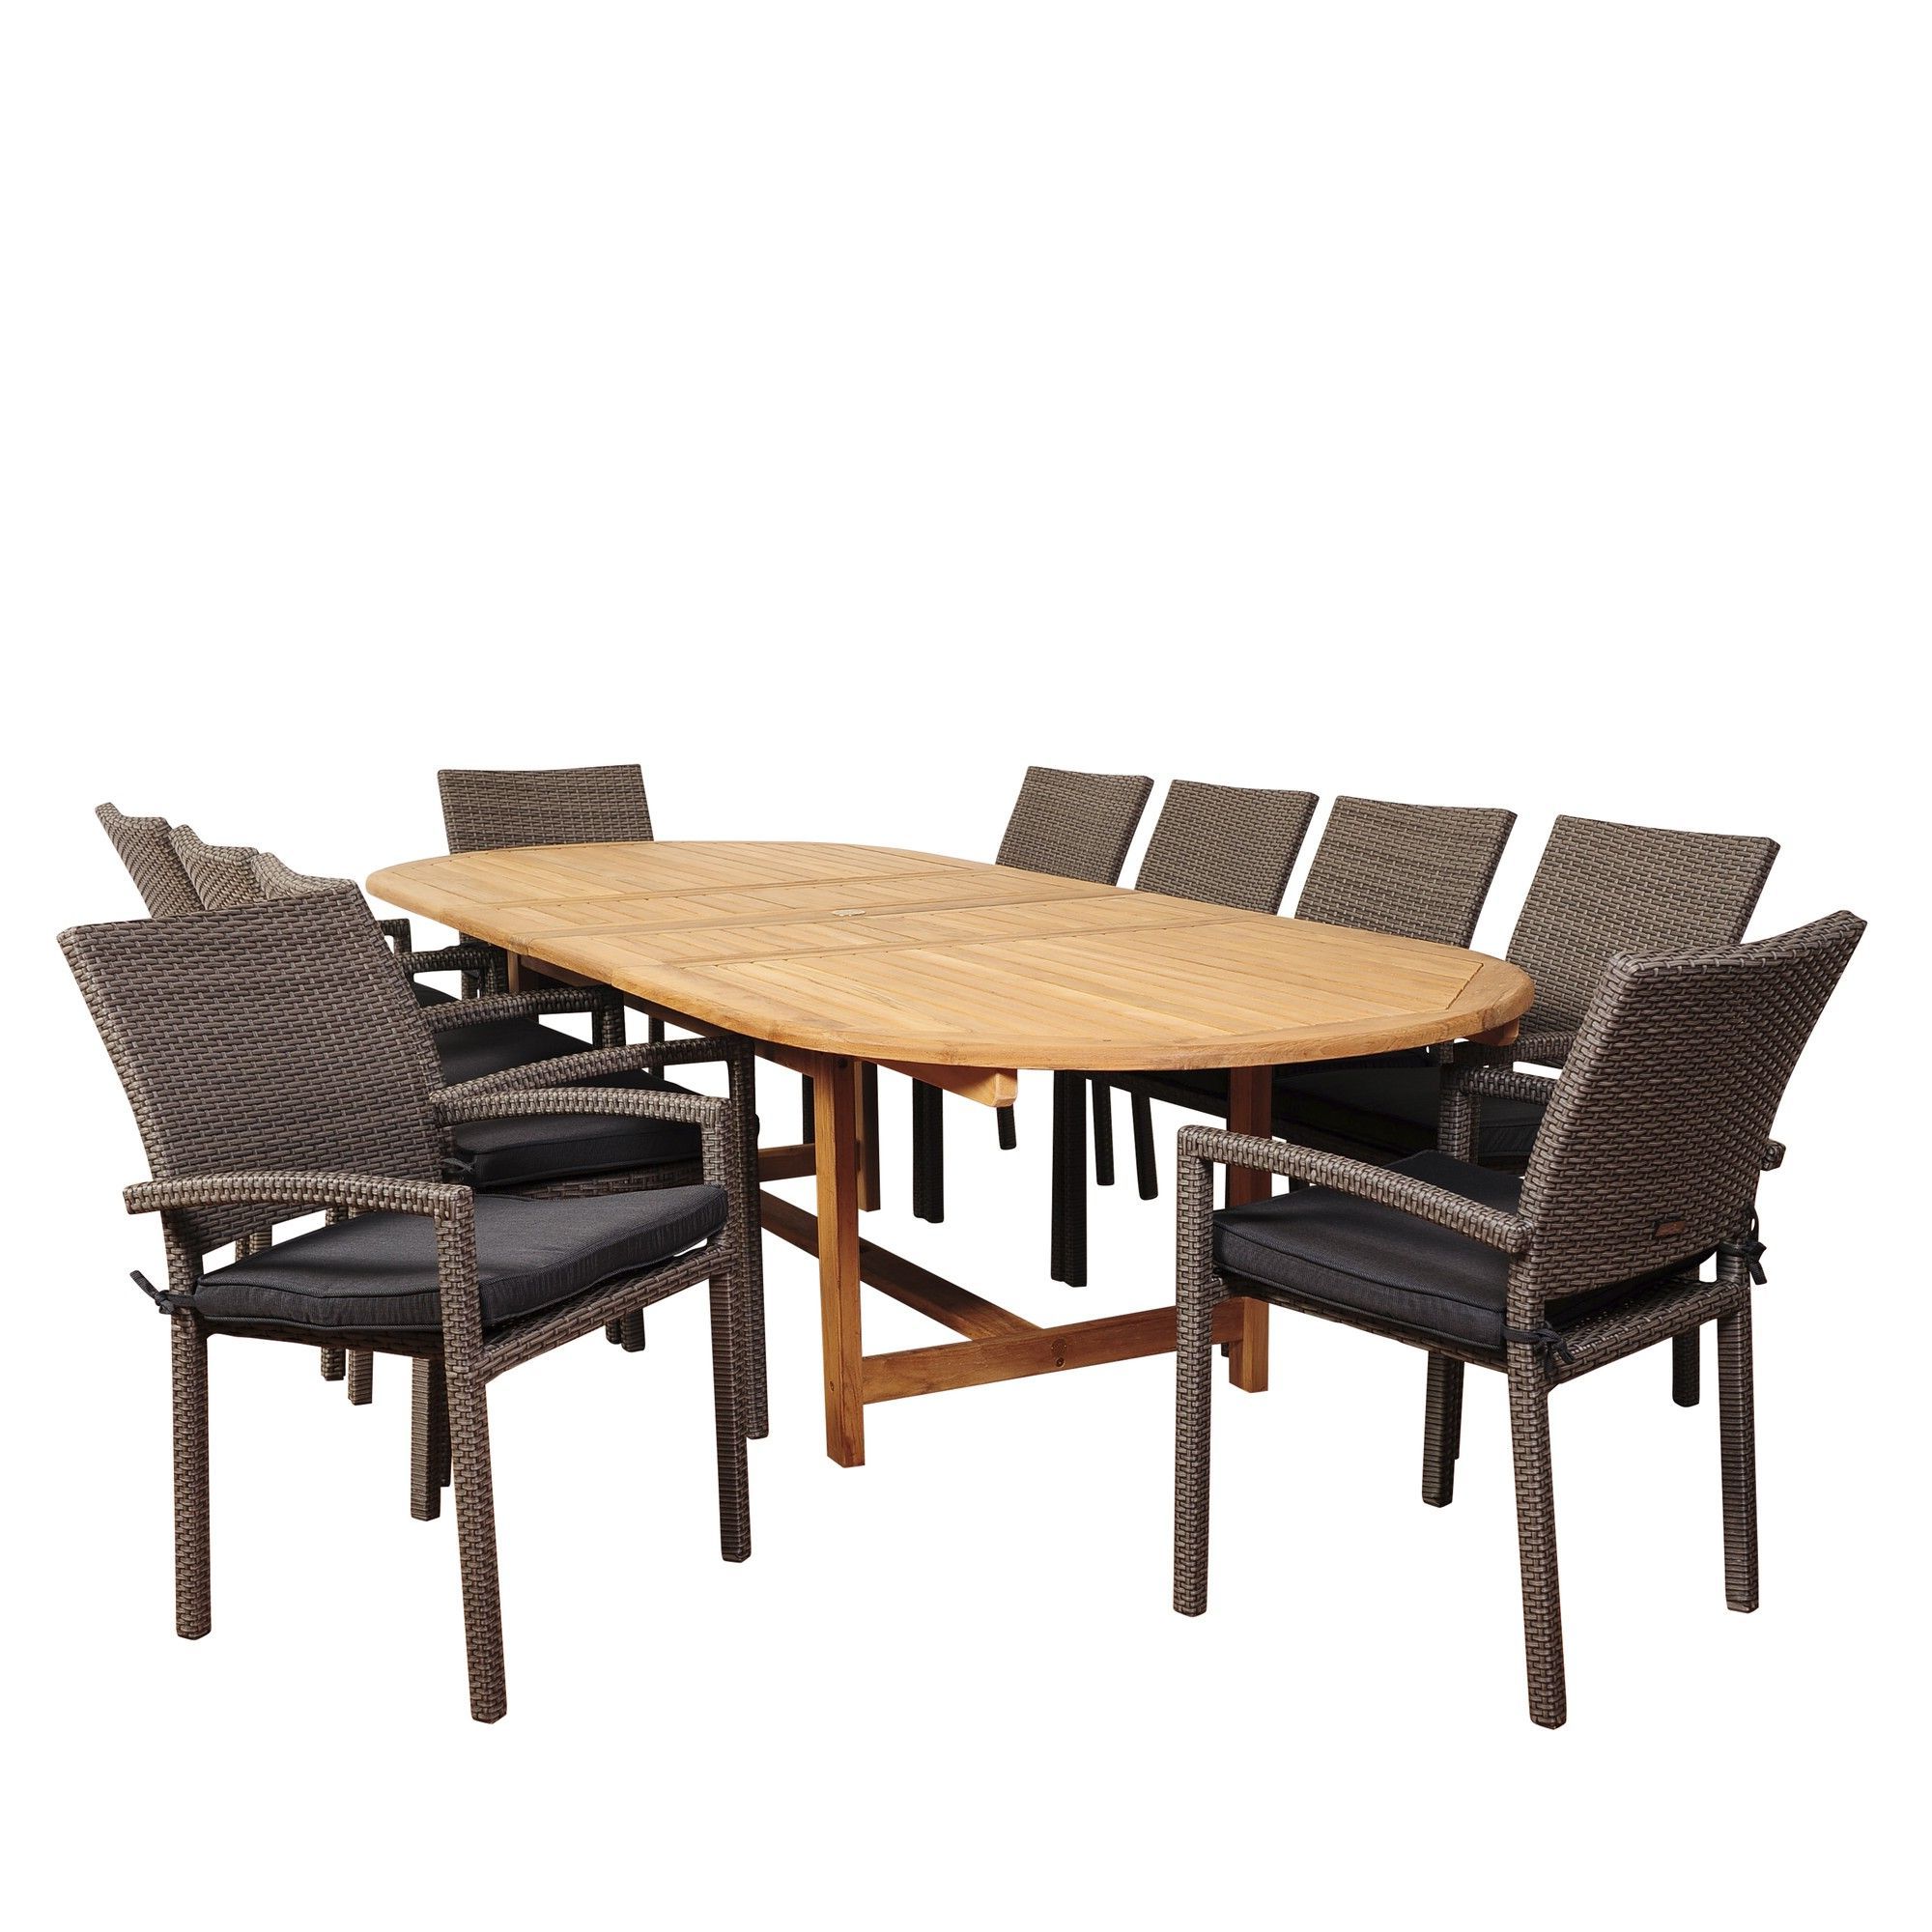 11 Piece Brown City Villa Teak Oval Double Extendable Outdoor Patio With Regard To Newest 11 Piece Extendable Patio Dining Sets (View 7 of 15)